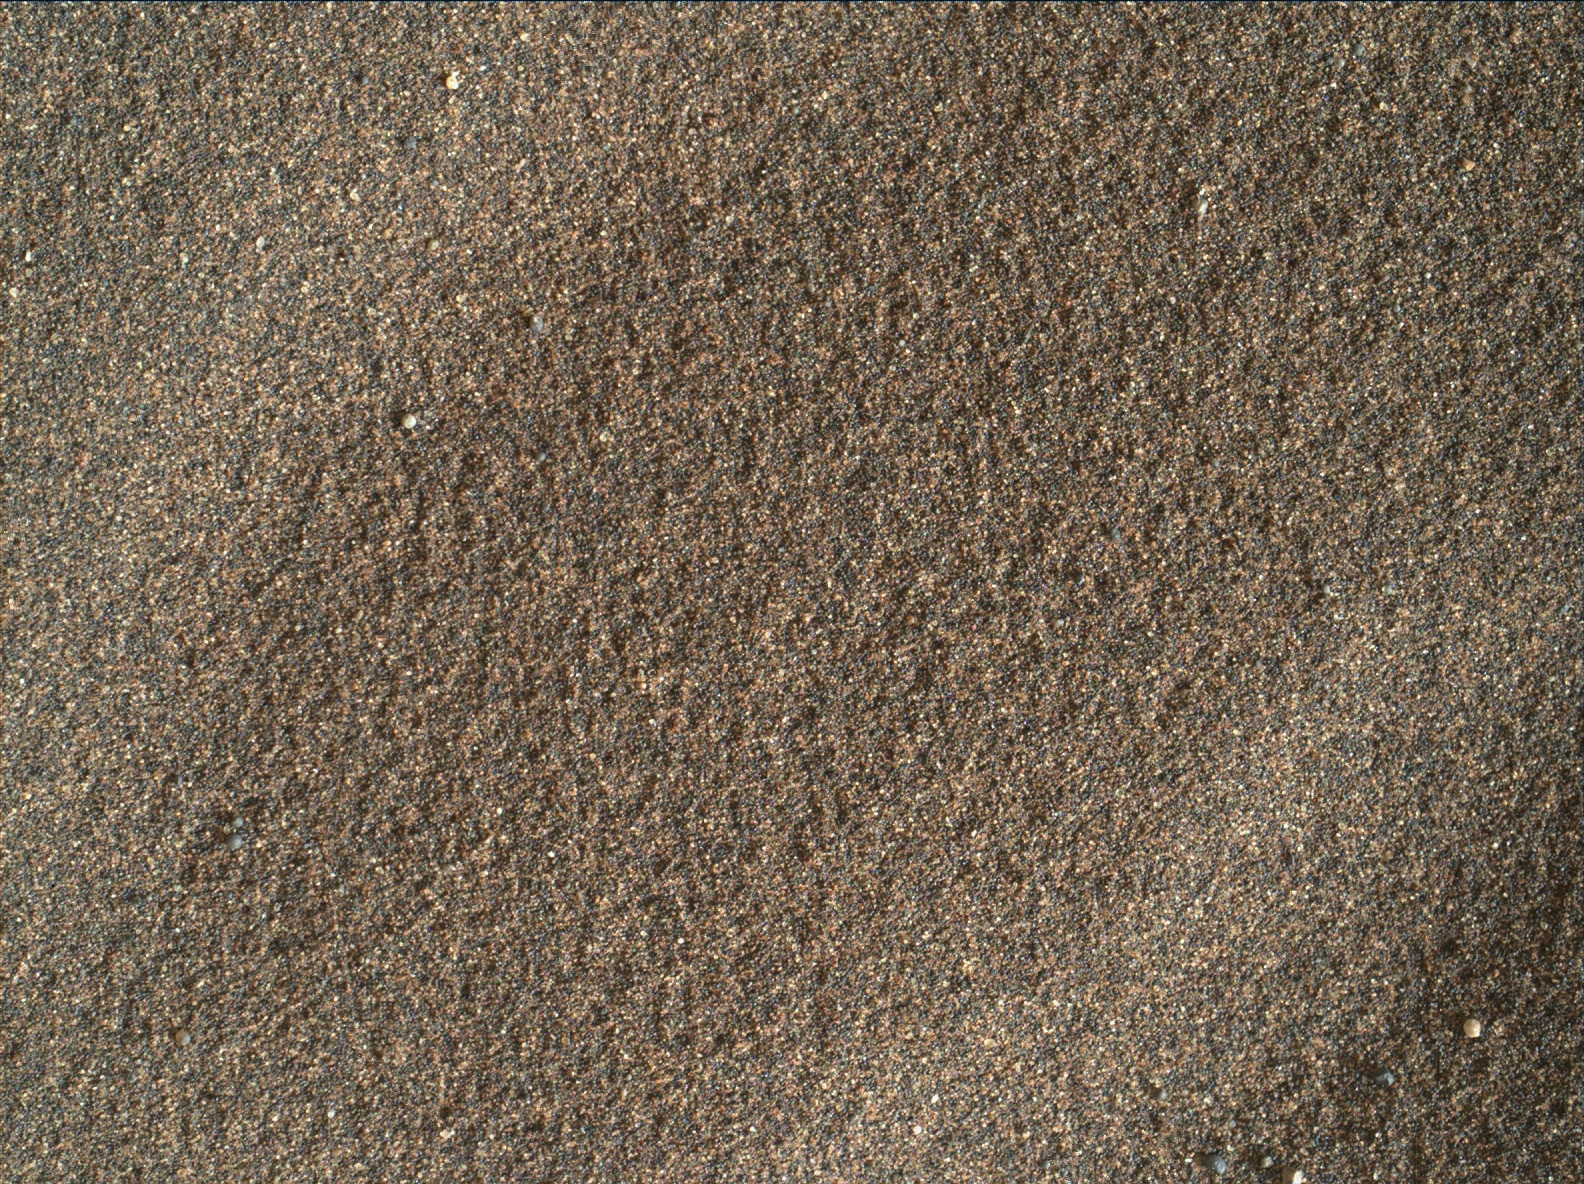 Nasa's Mars rover Curiosity acquired this image using its Mars Hand Lens Imager (MAHLI) on Sol 1619